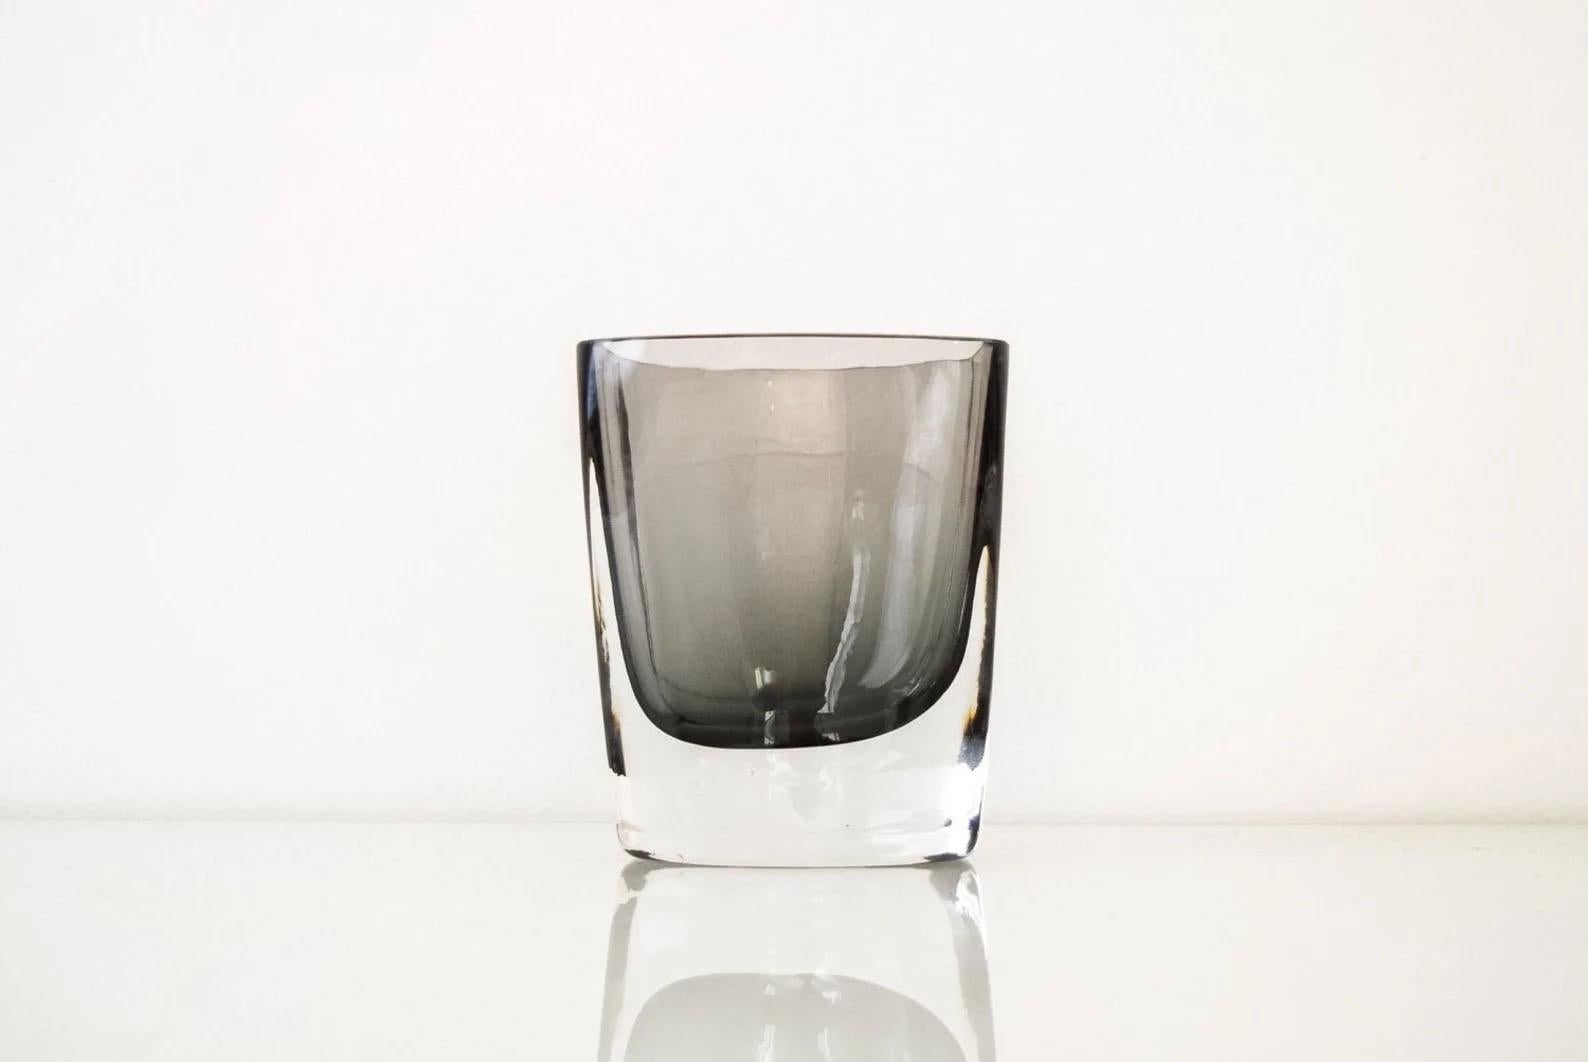 This striking Mid-Century Modern smoked gray glass decorative vase is made from transluscent smoked glass with a thick clear base. It features a beautiful profile with a unique rectangular shape, clean lines and gentle curves.